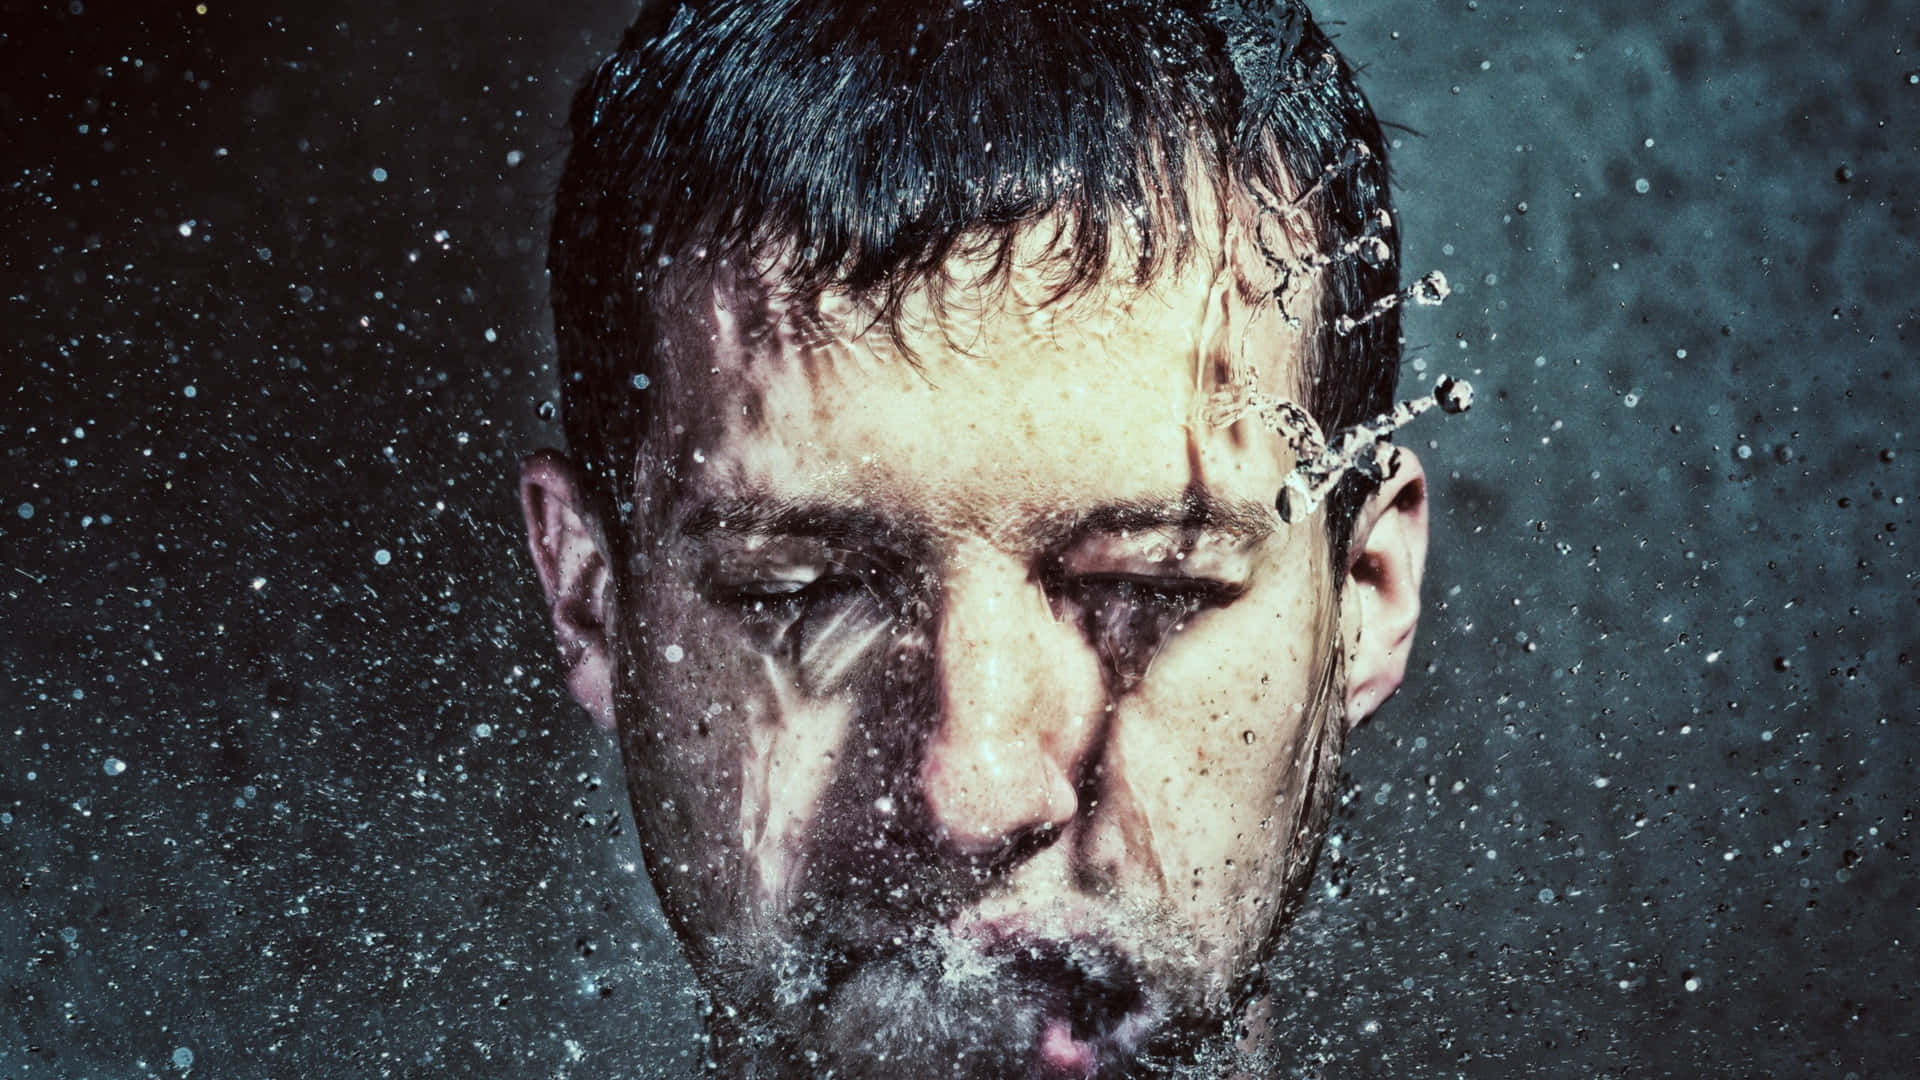 Man Face Splashed With Water Wallpaper